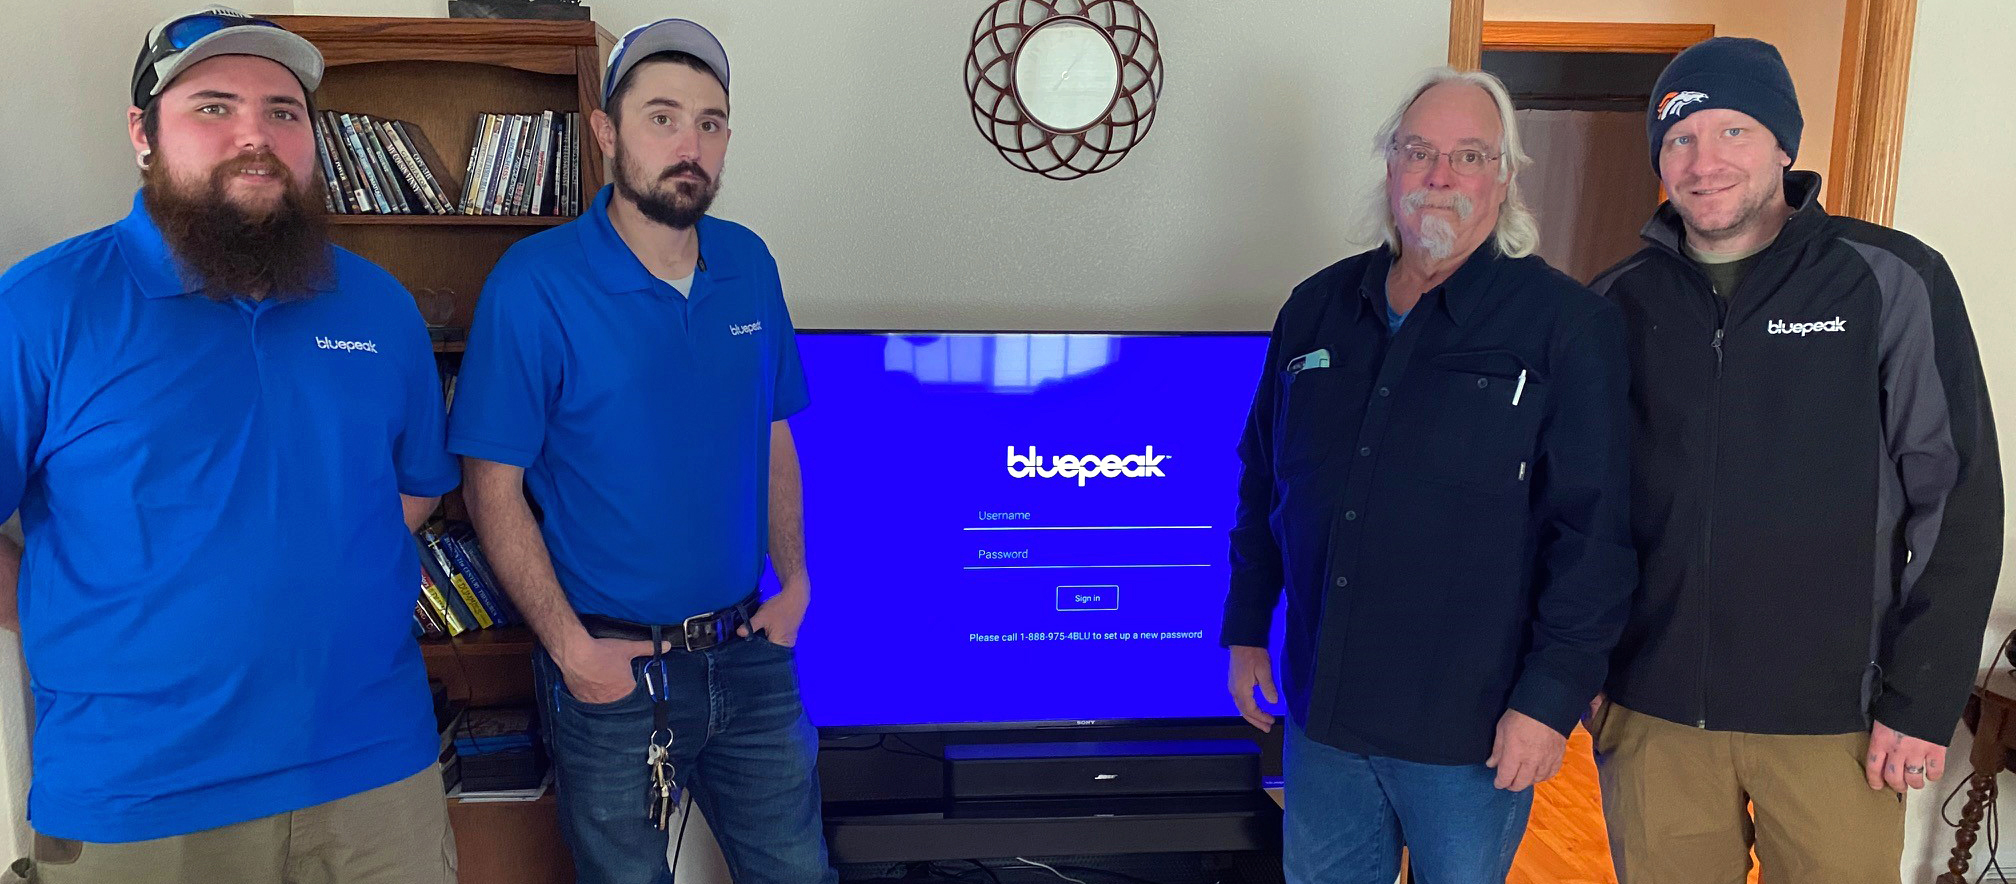 Bluepeak’s Derreck Easley, Christian Hauf and Wesley Foster (left to right) stand with Gary Powell, the fiber internet provider’s first customer in Sheridan, Wyo.